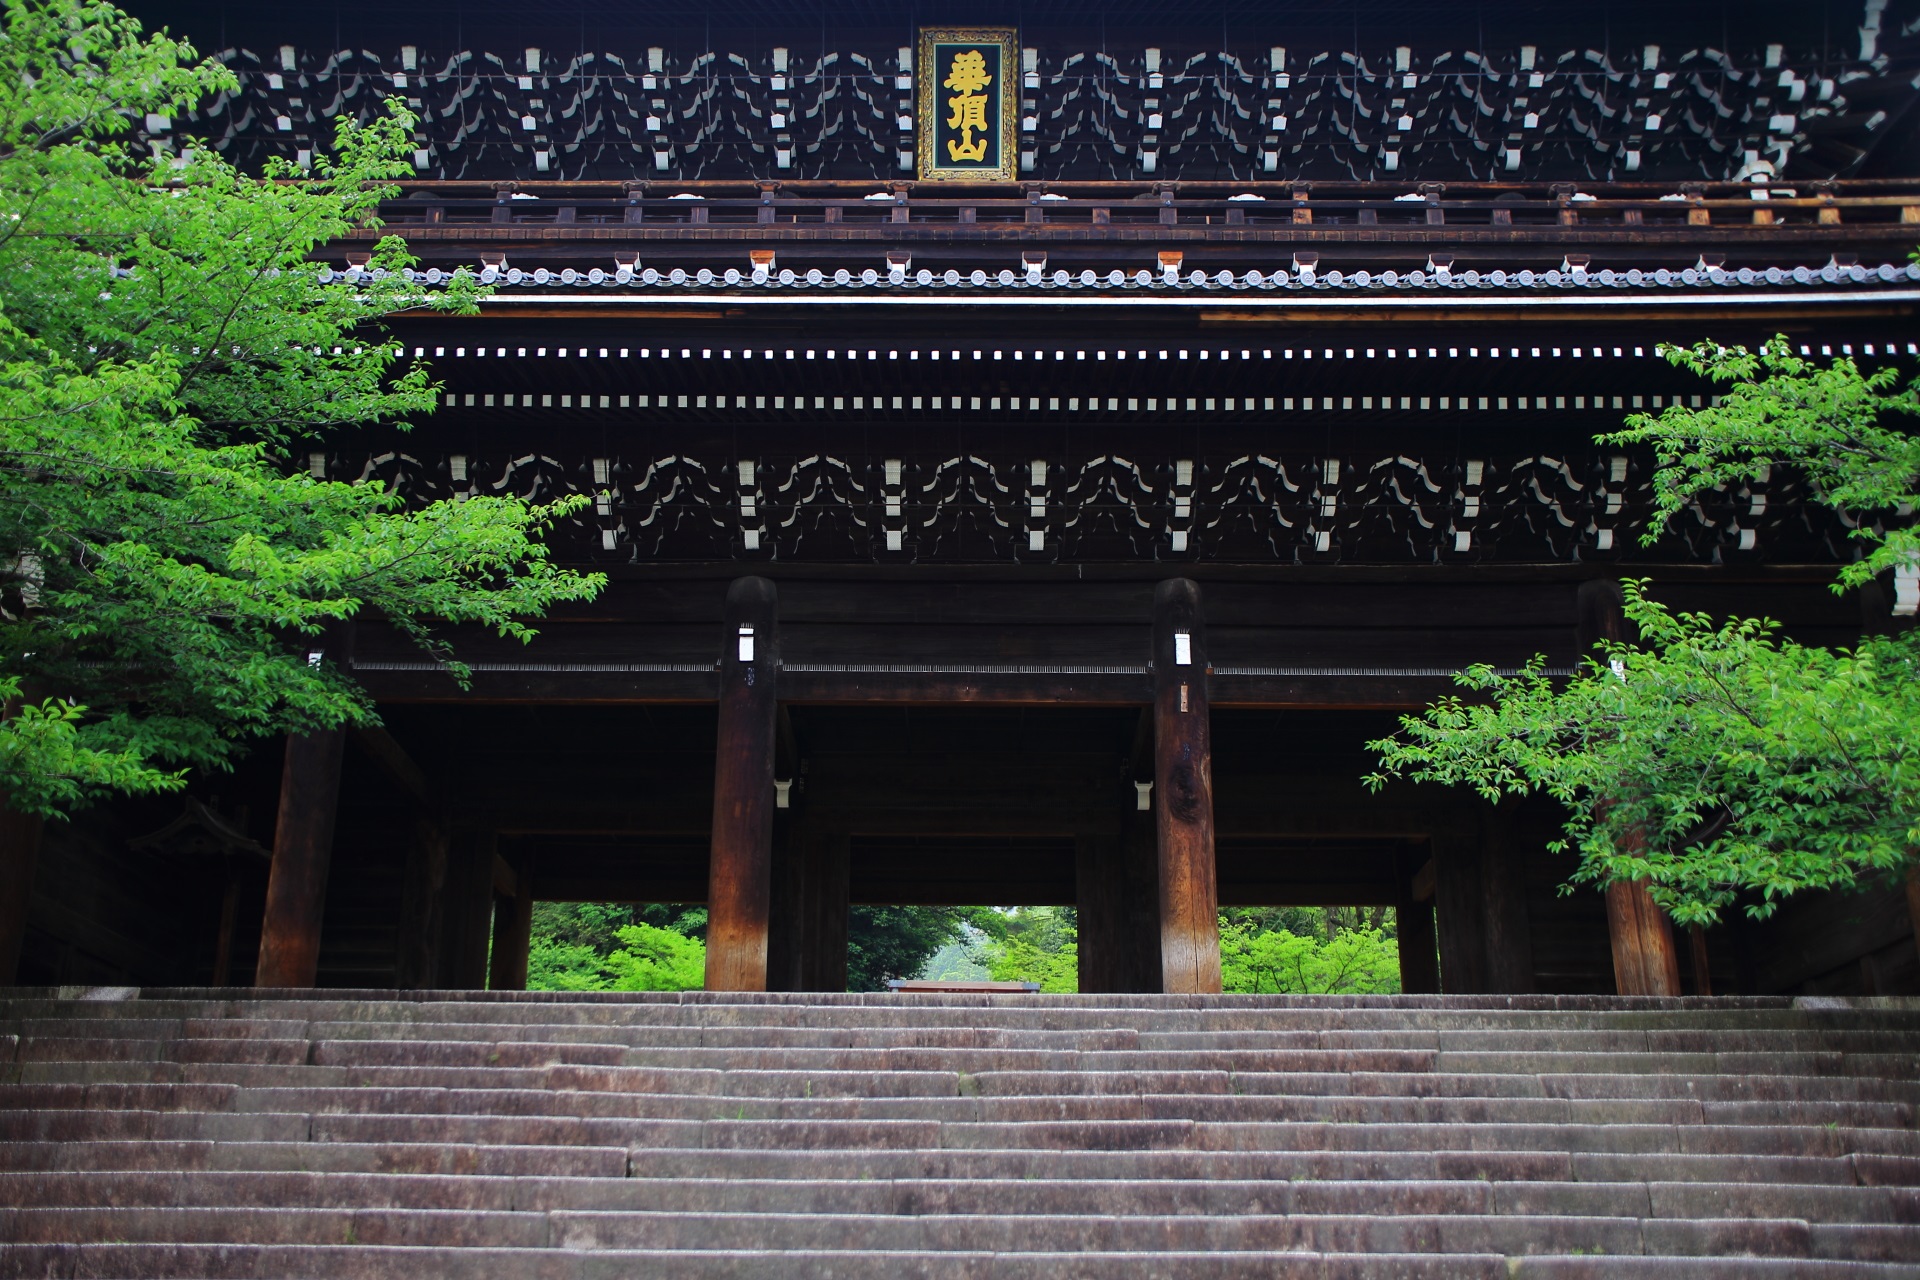 Sanmon which is a huge gate of Chionin-Temple in Kyoto,Japan